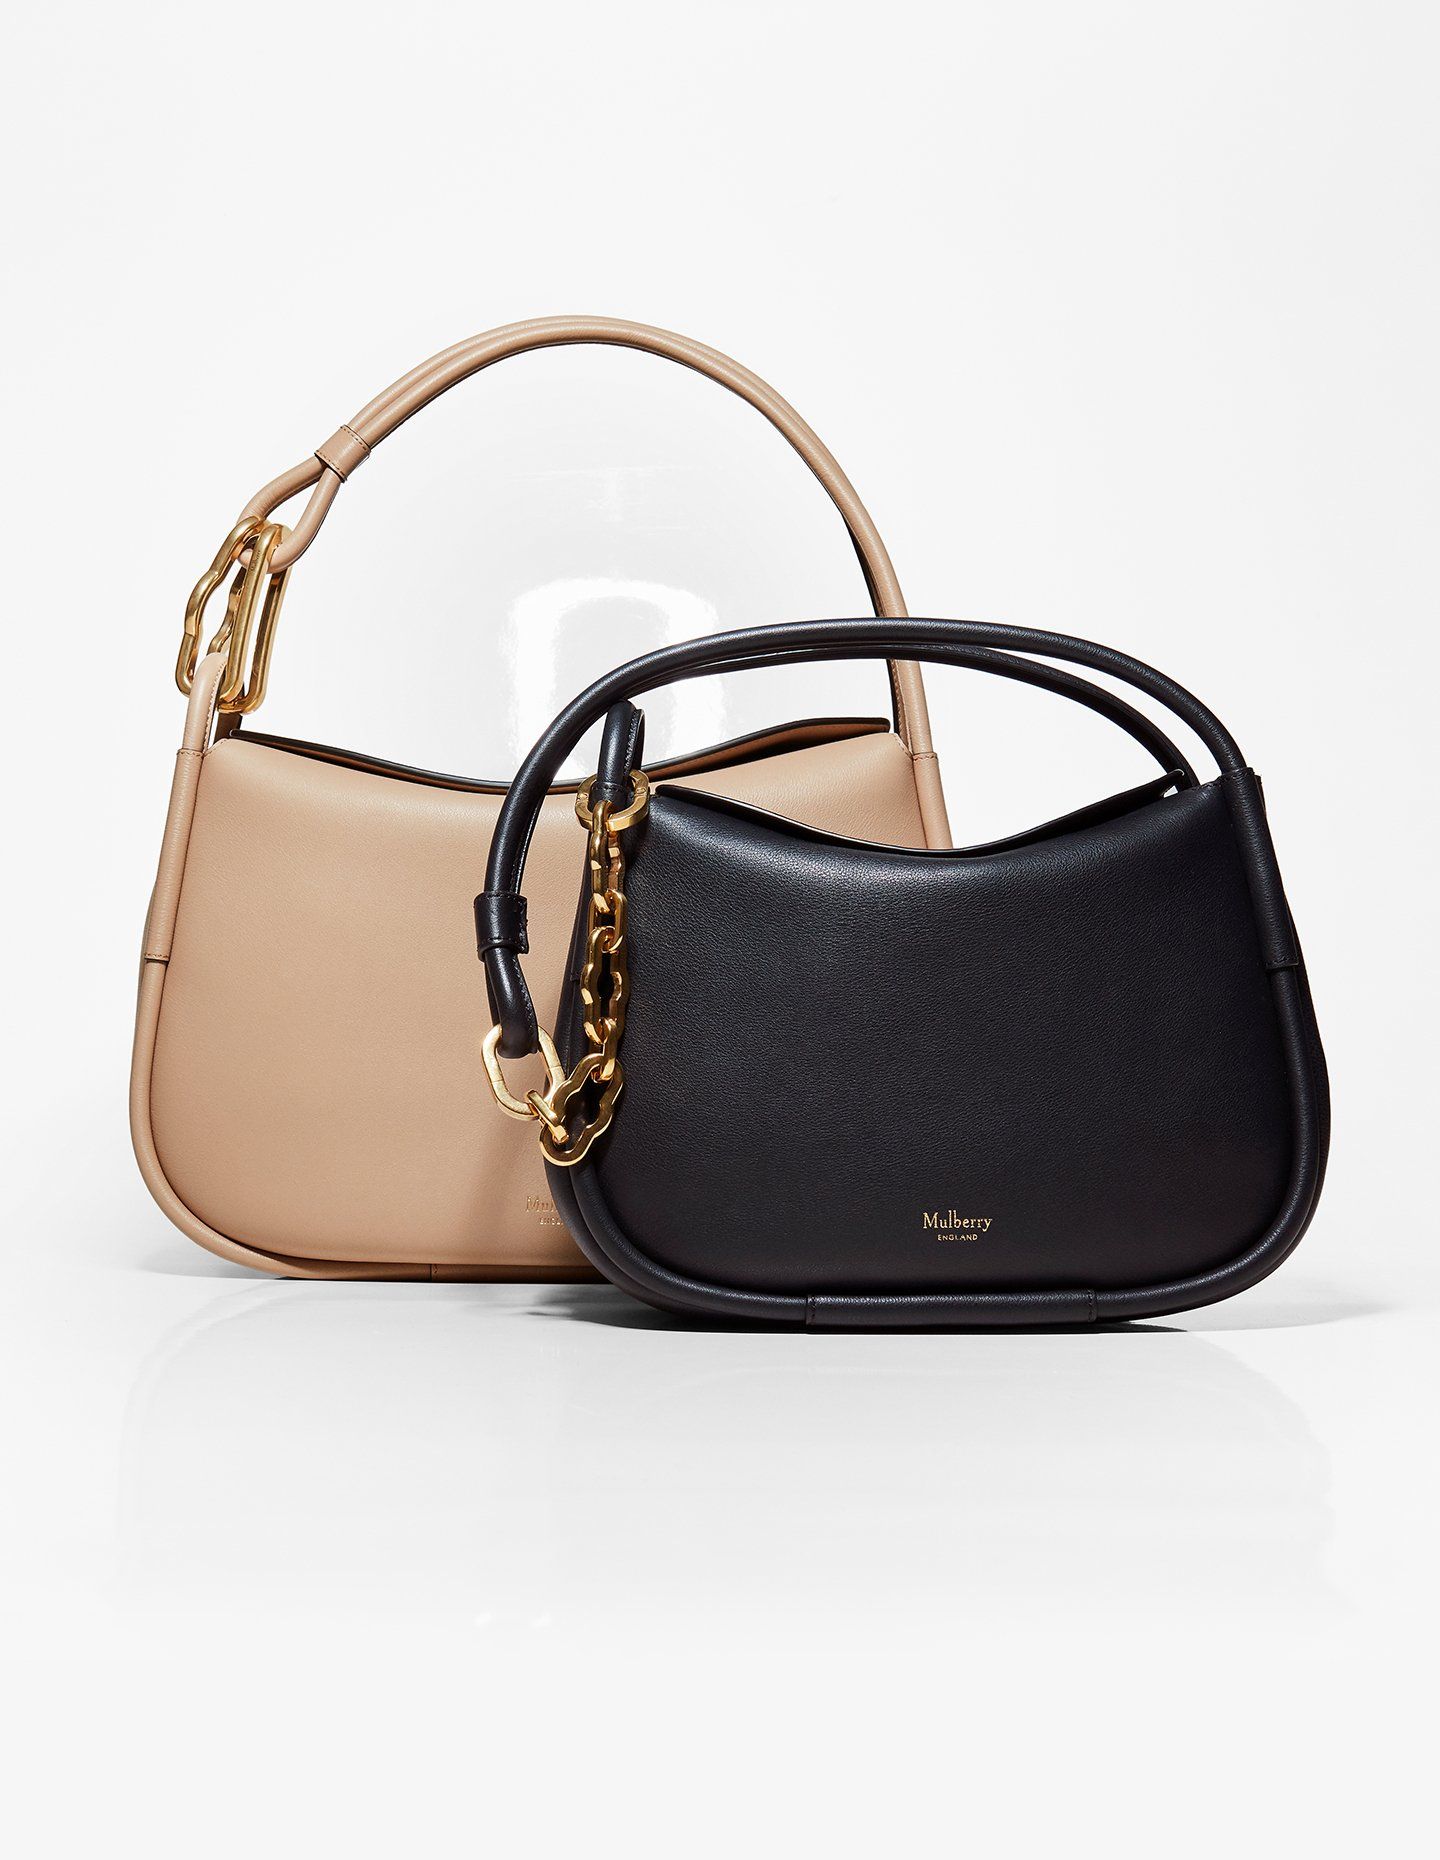 Mulberry Link bag in maple and small link bag in black